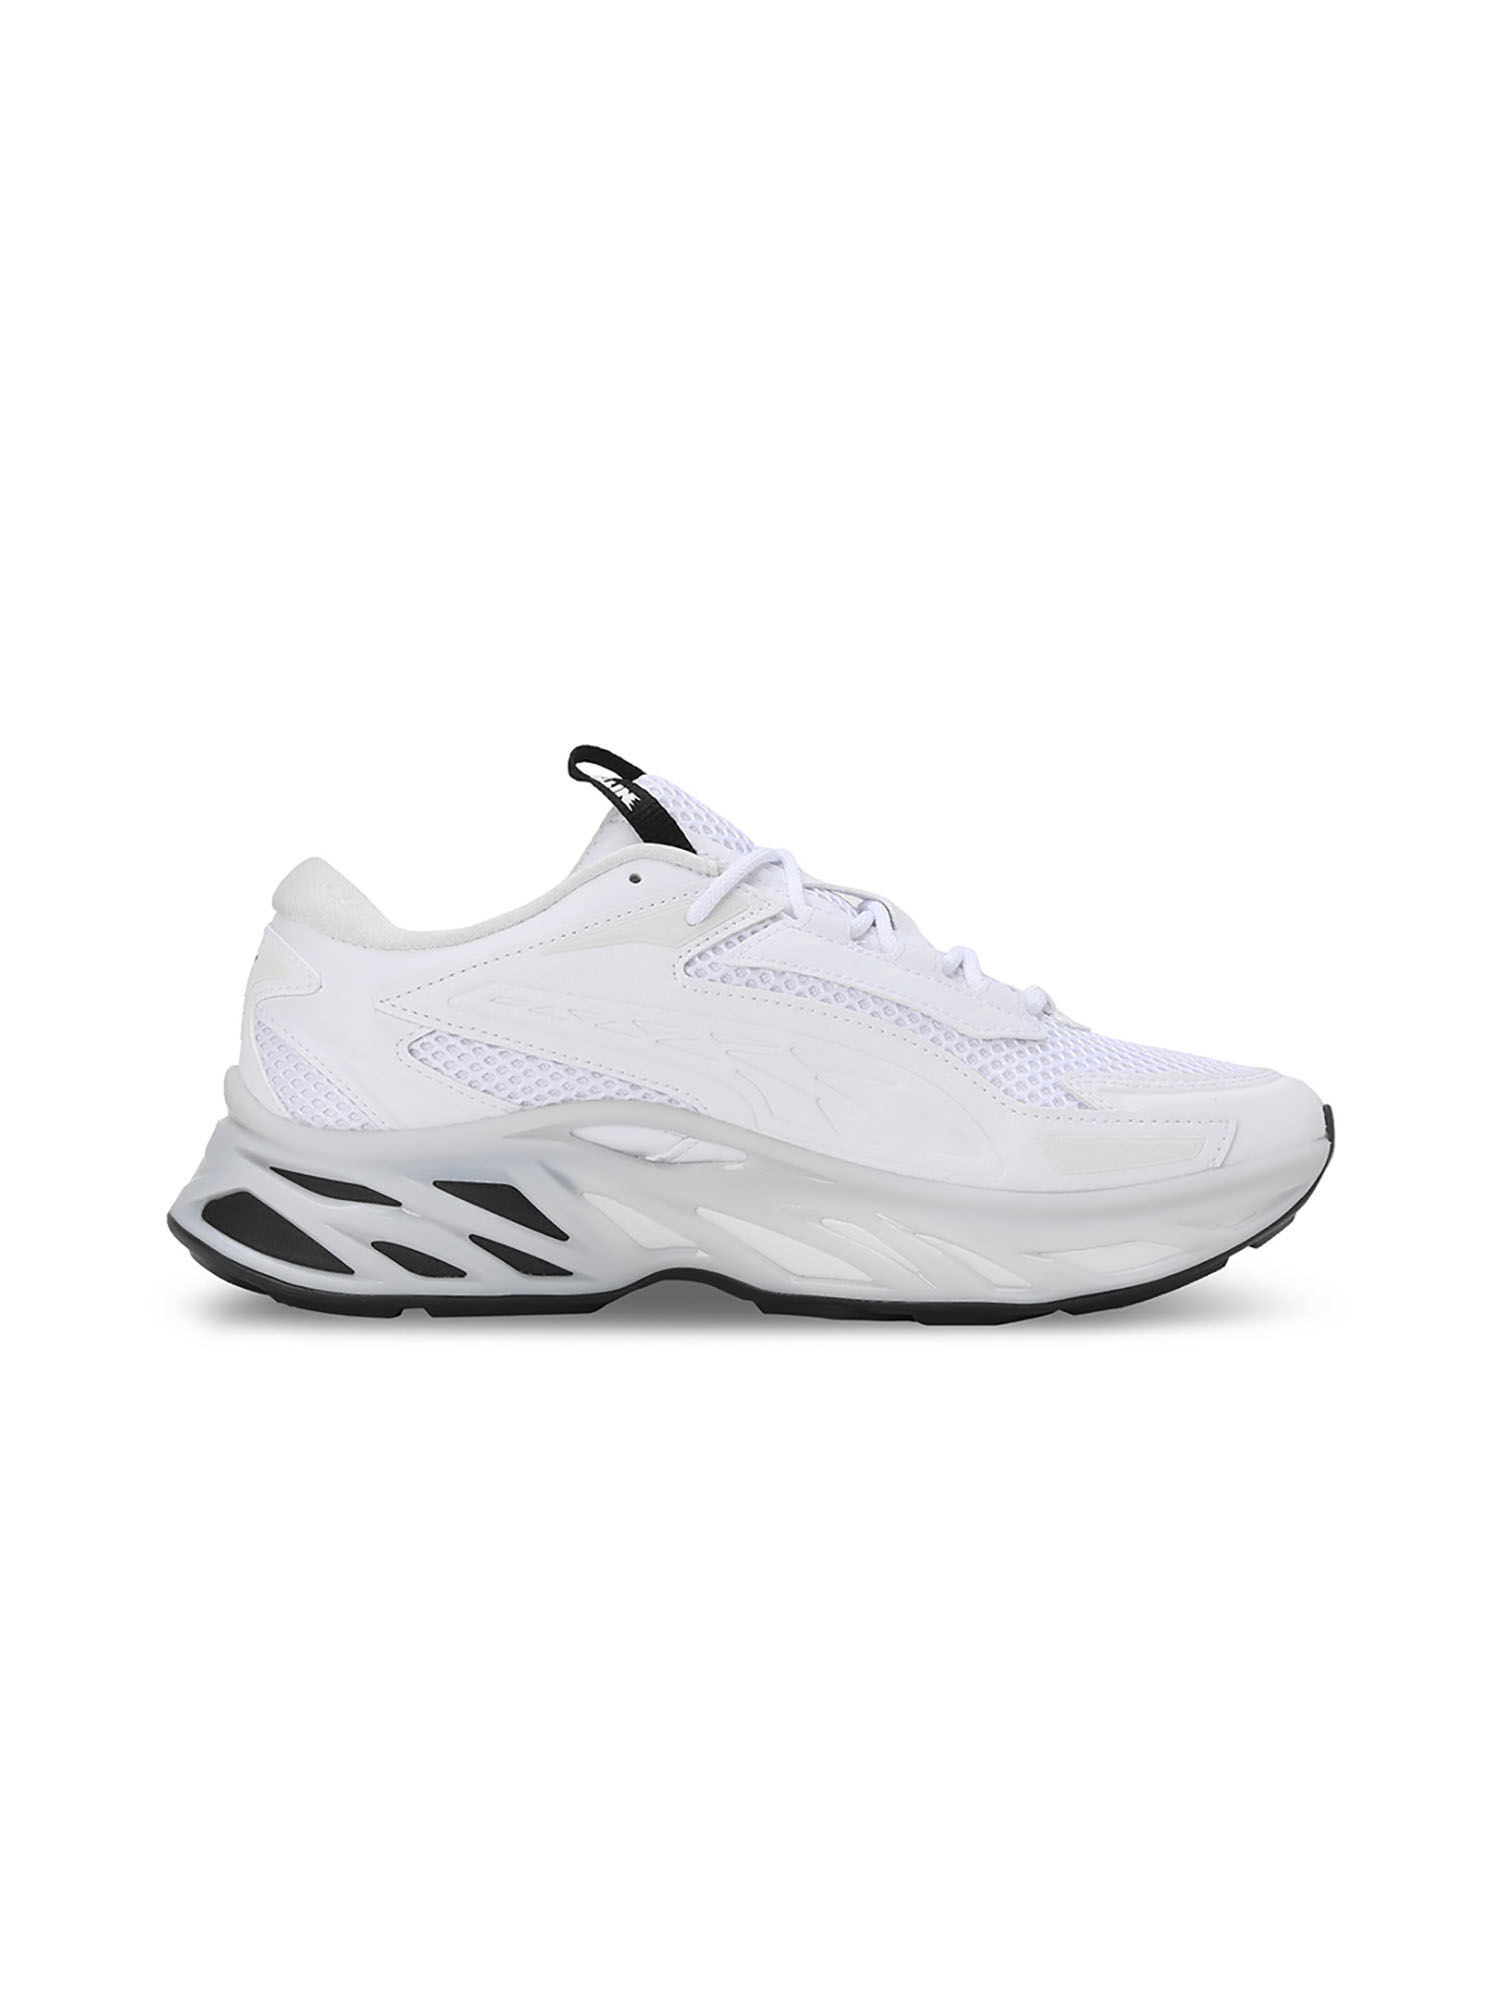 Puma Women's Carina 2.0 Casual Sneakers from Finish Line - Macy's